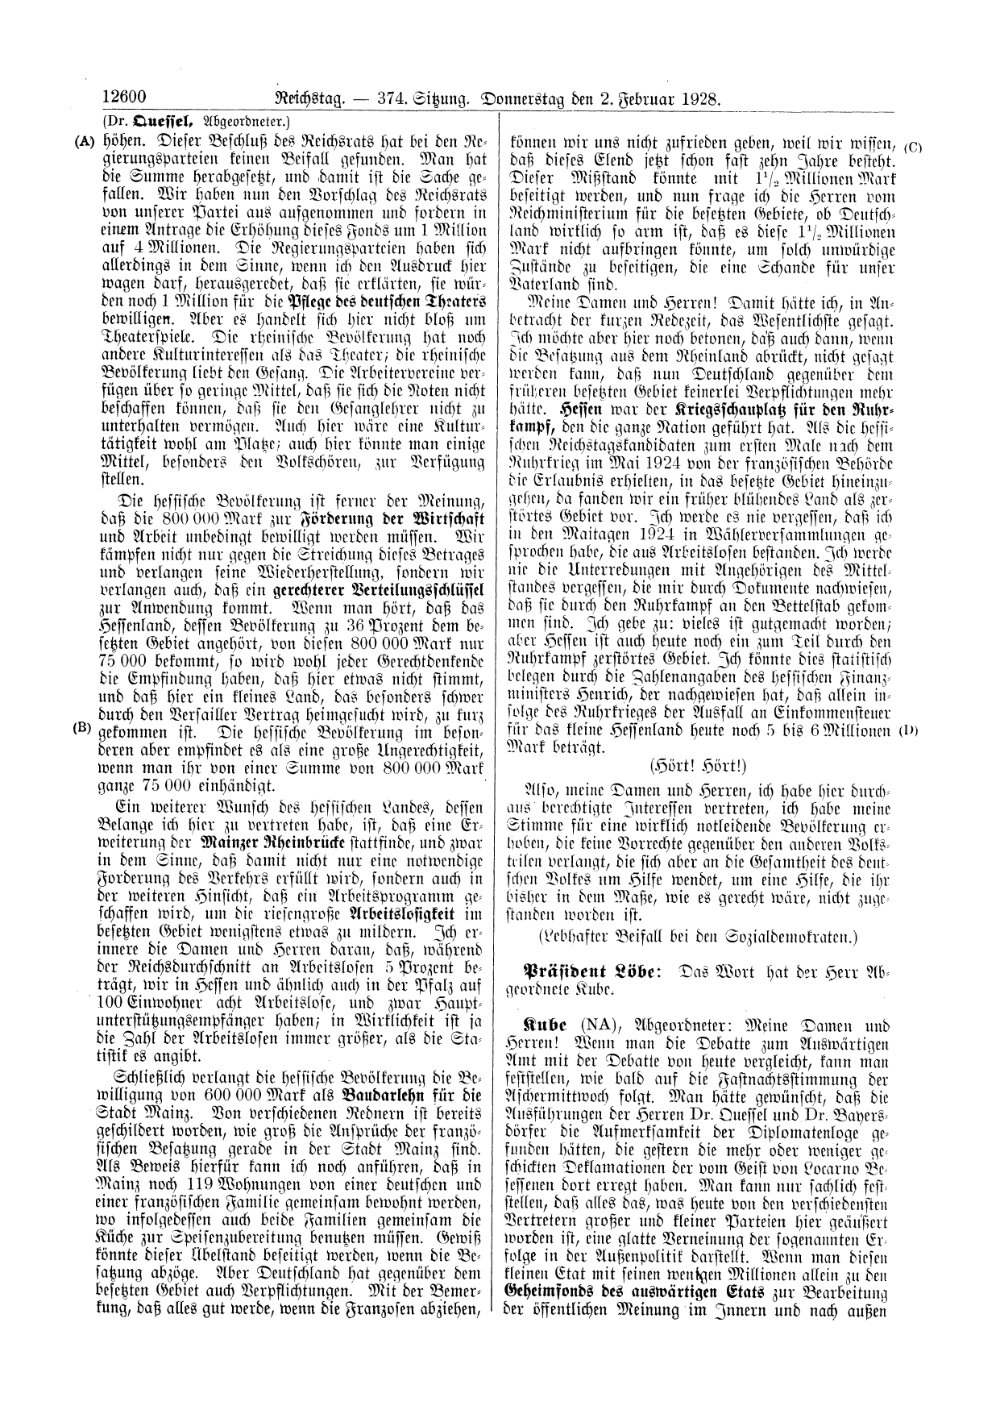 Scan of page 12600